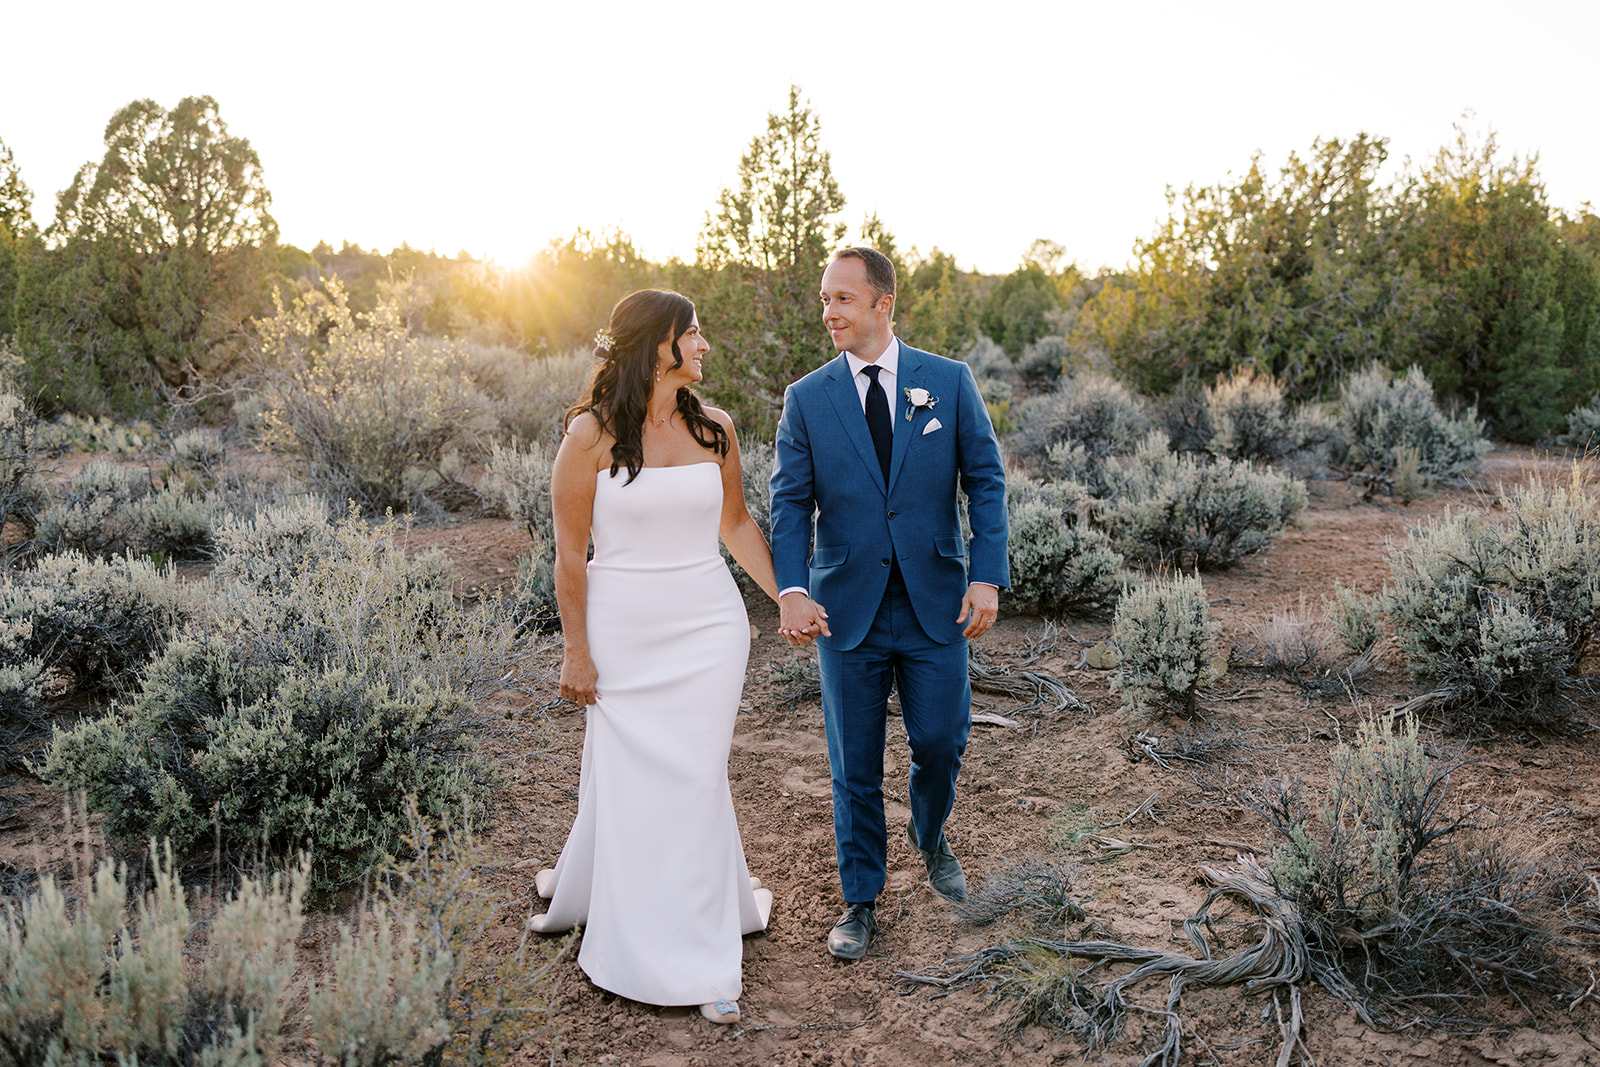 Wedding ceremony on BLM land outside of Zion National Park